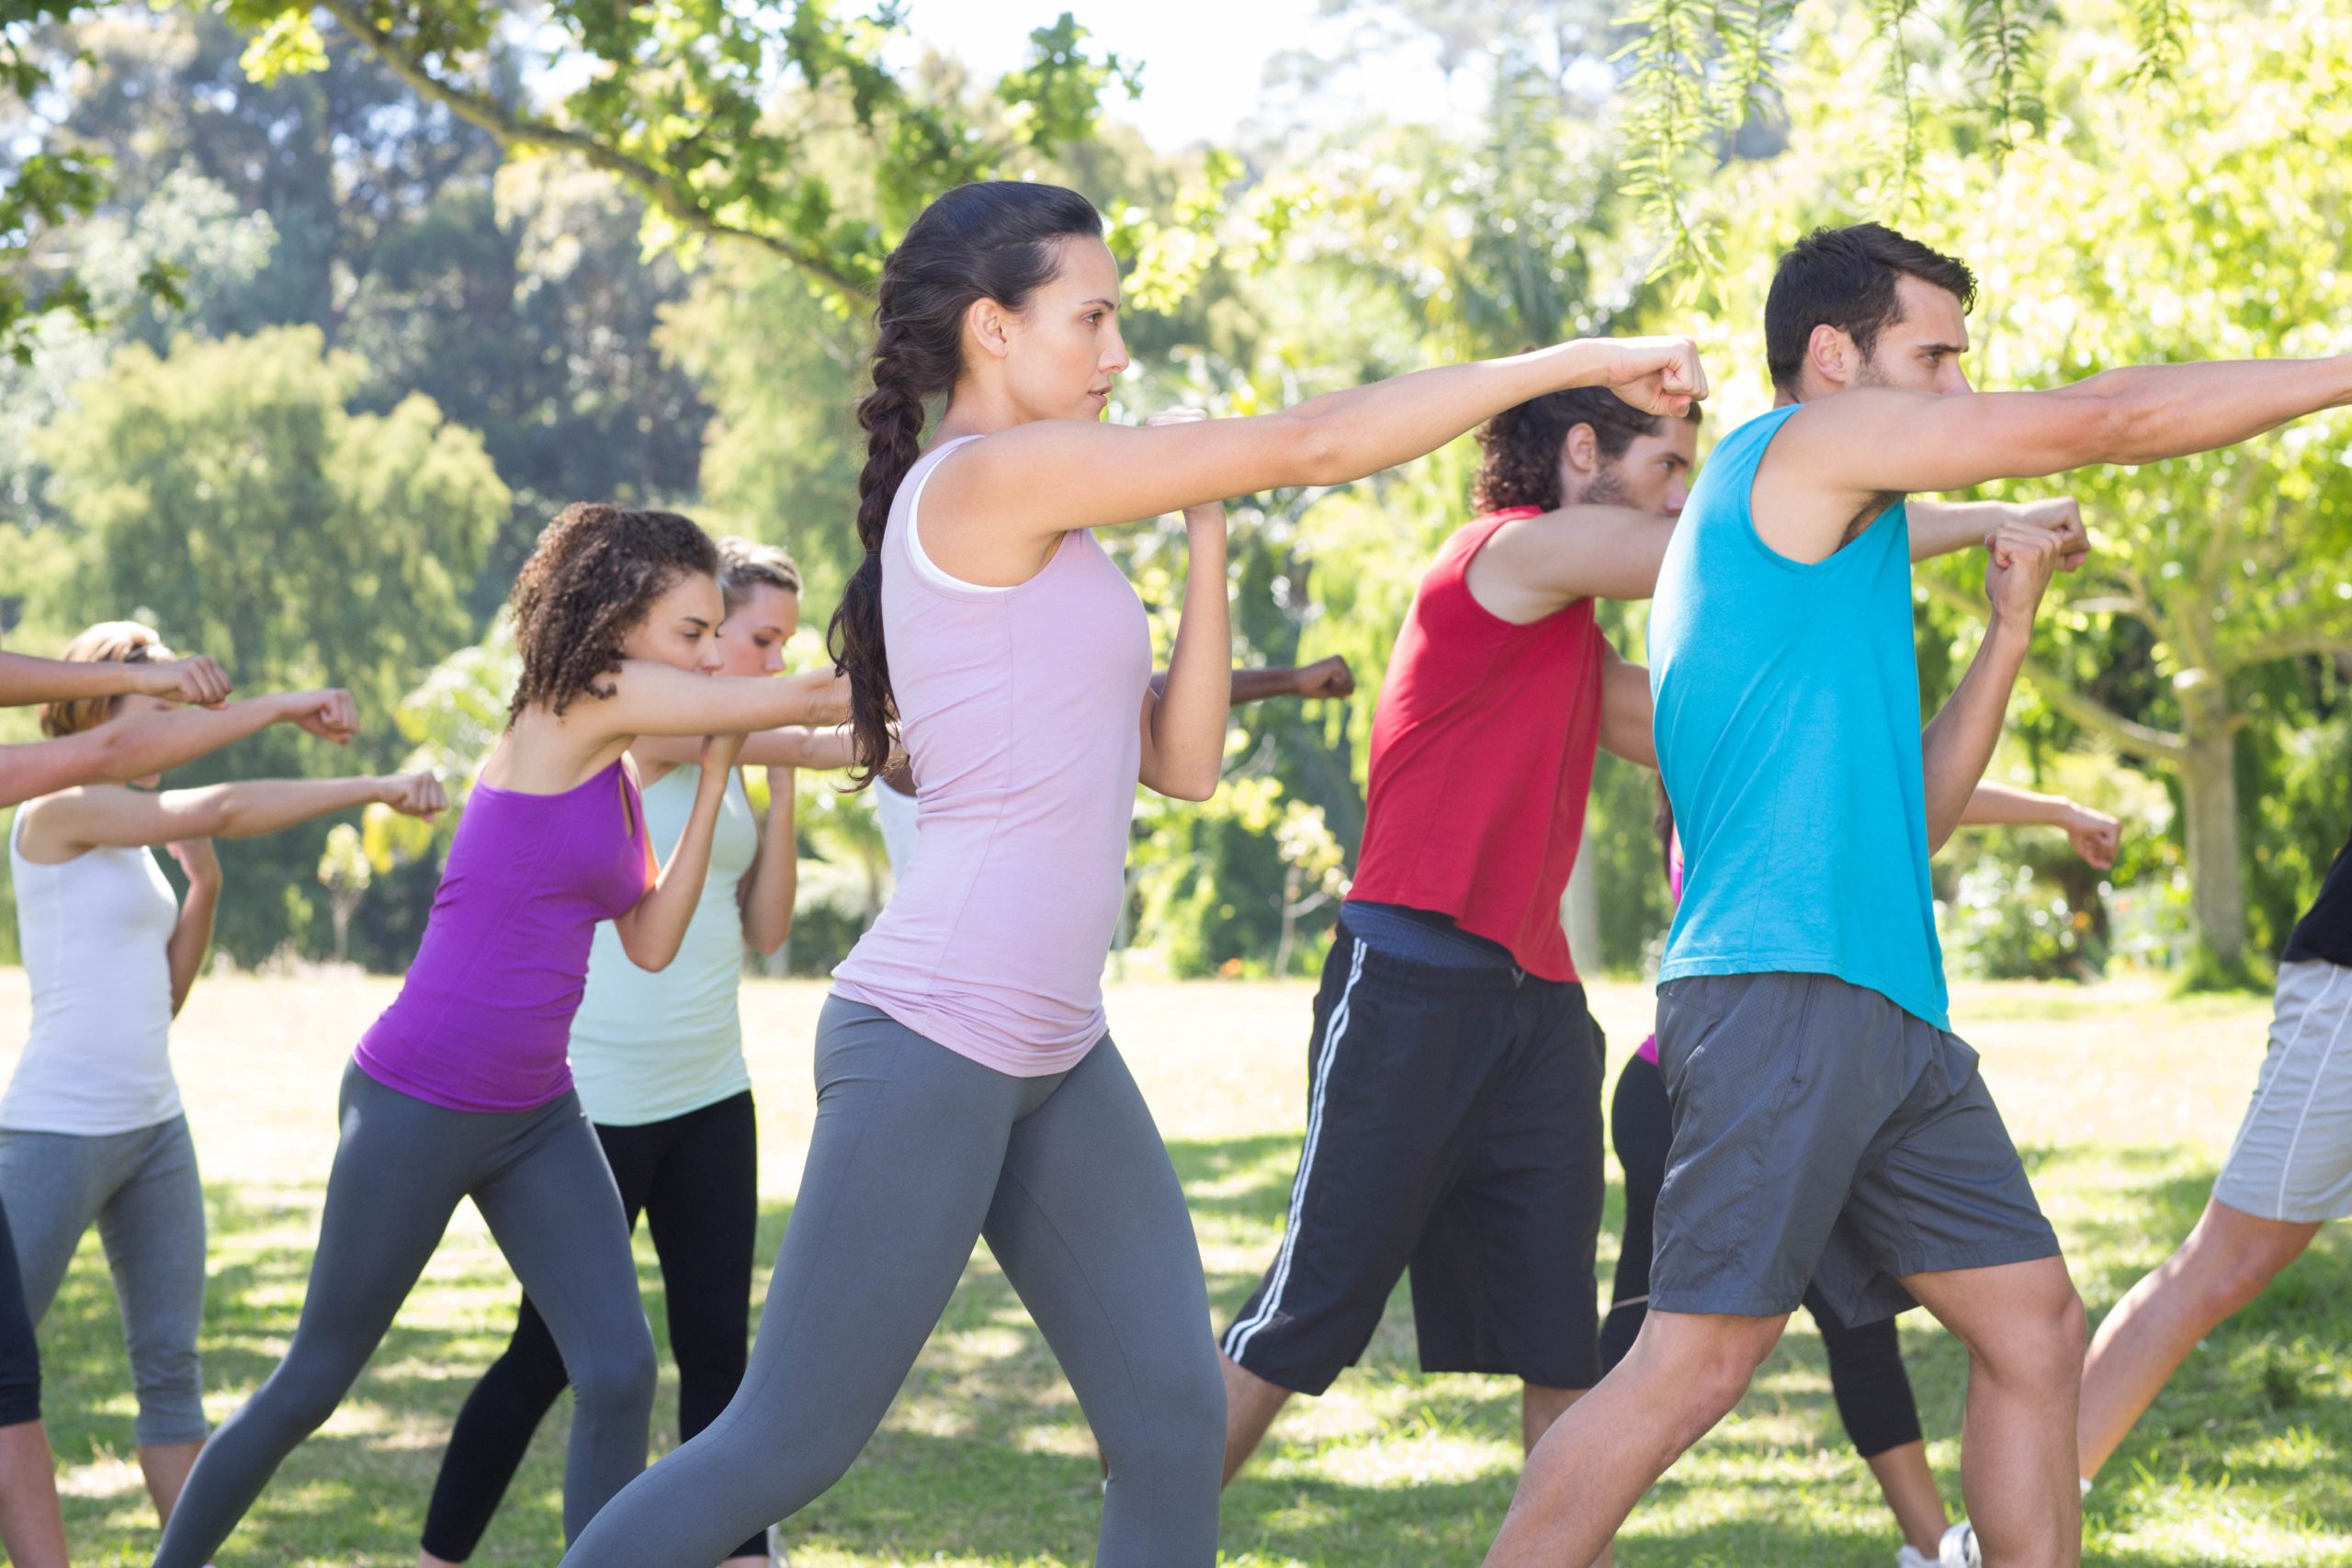 fitness group doing aerobic martial arts training outdoors